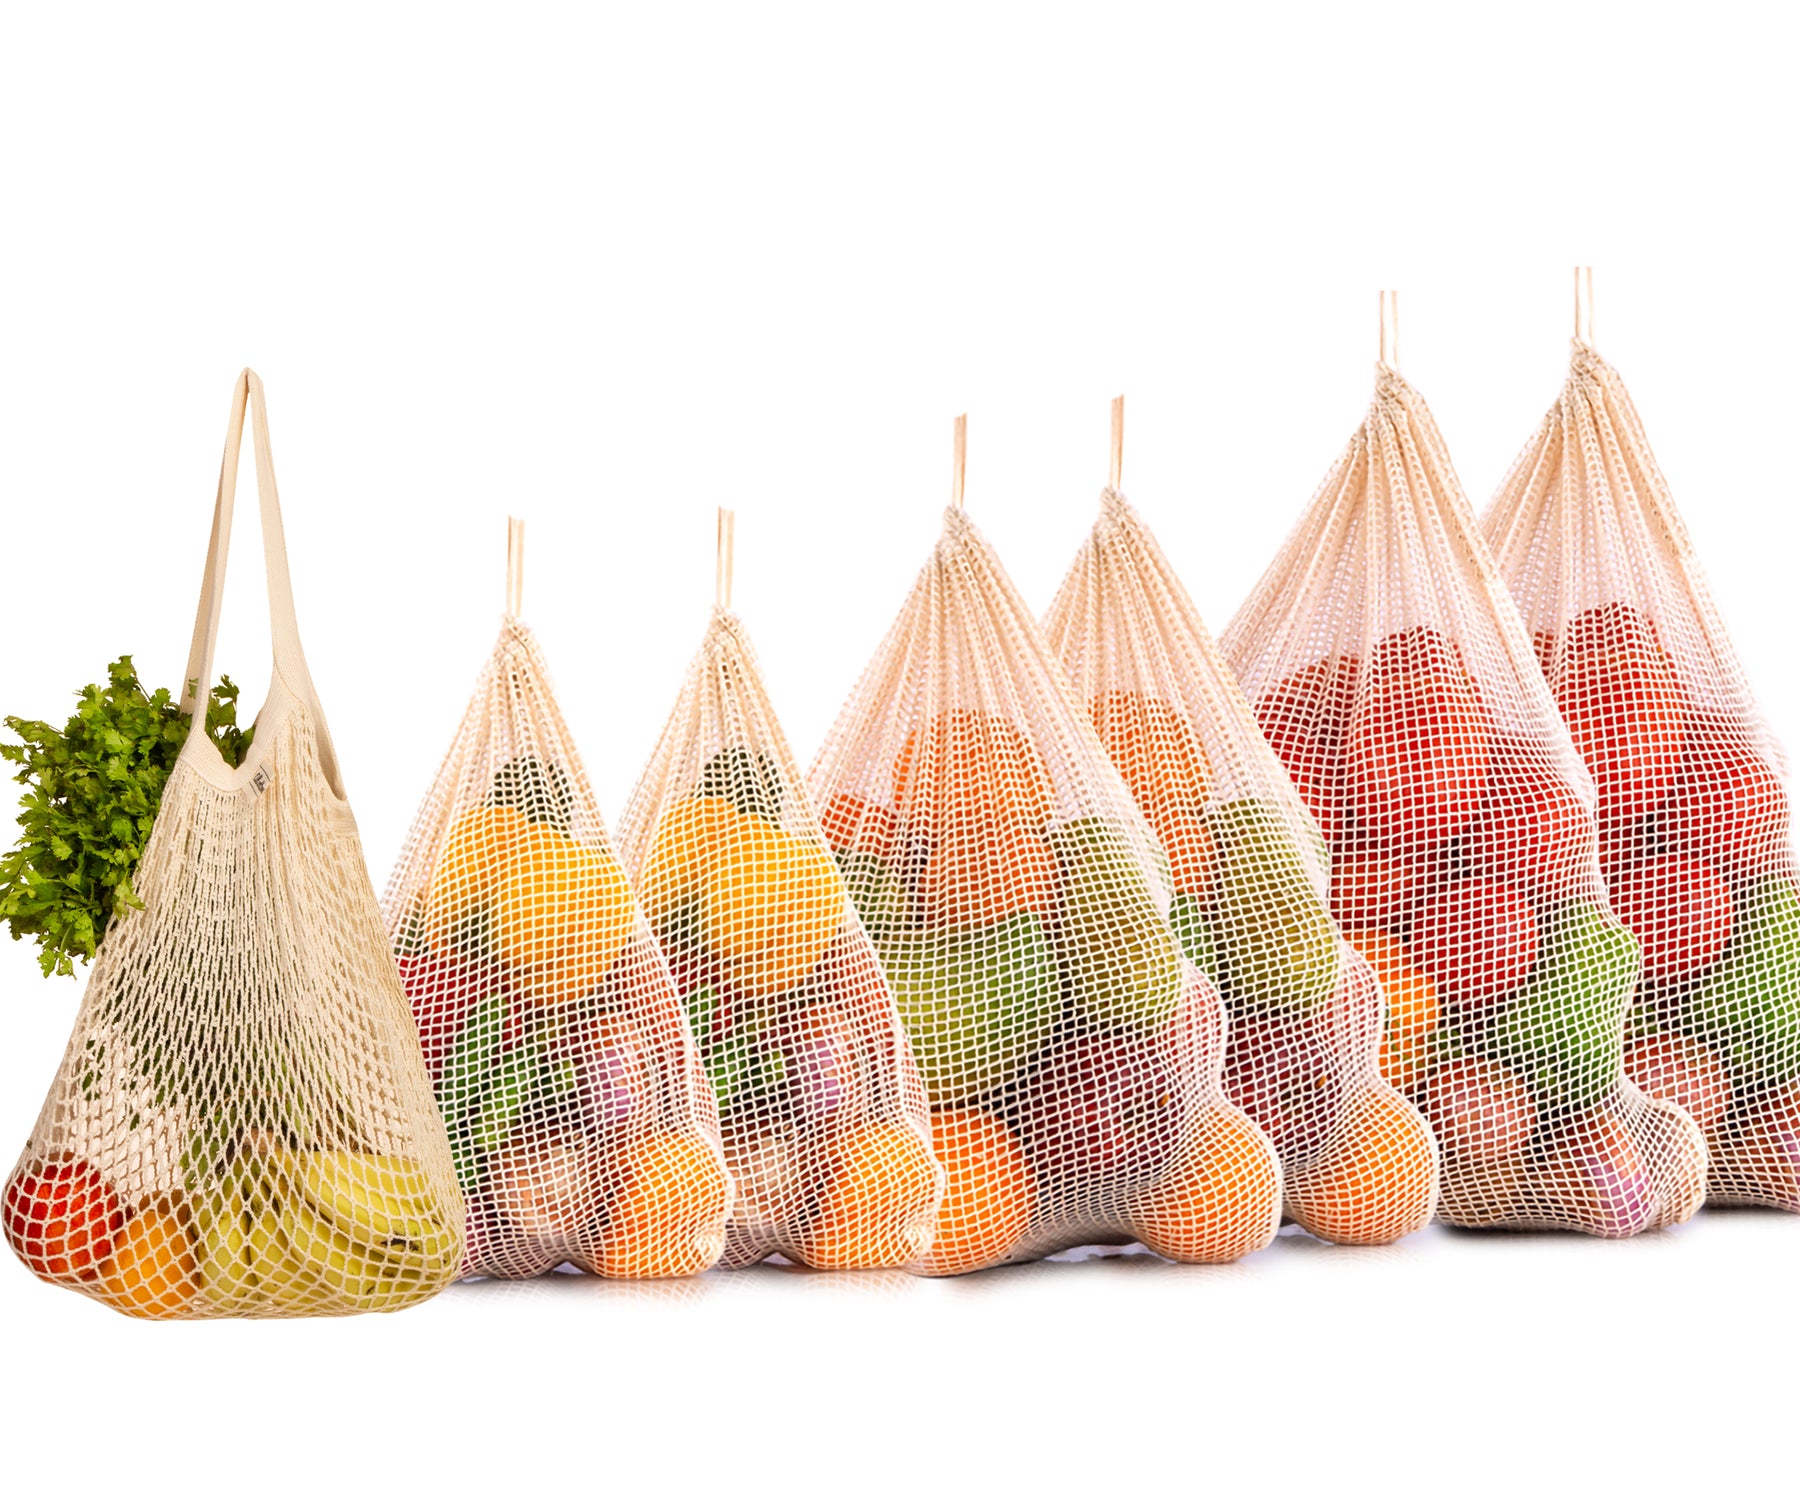 An assortment of five string bags, each filled with fresh produce